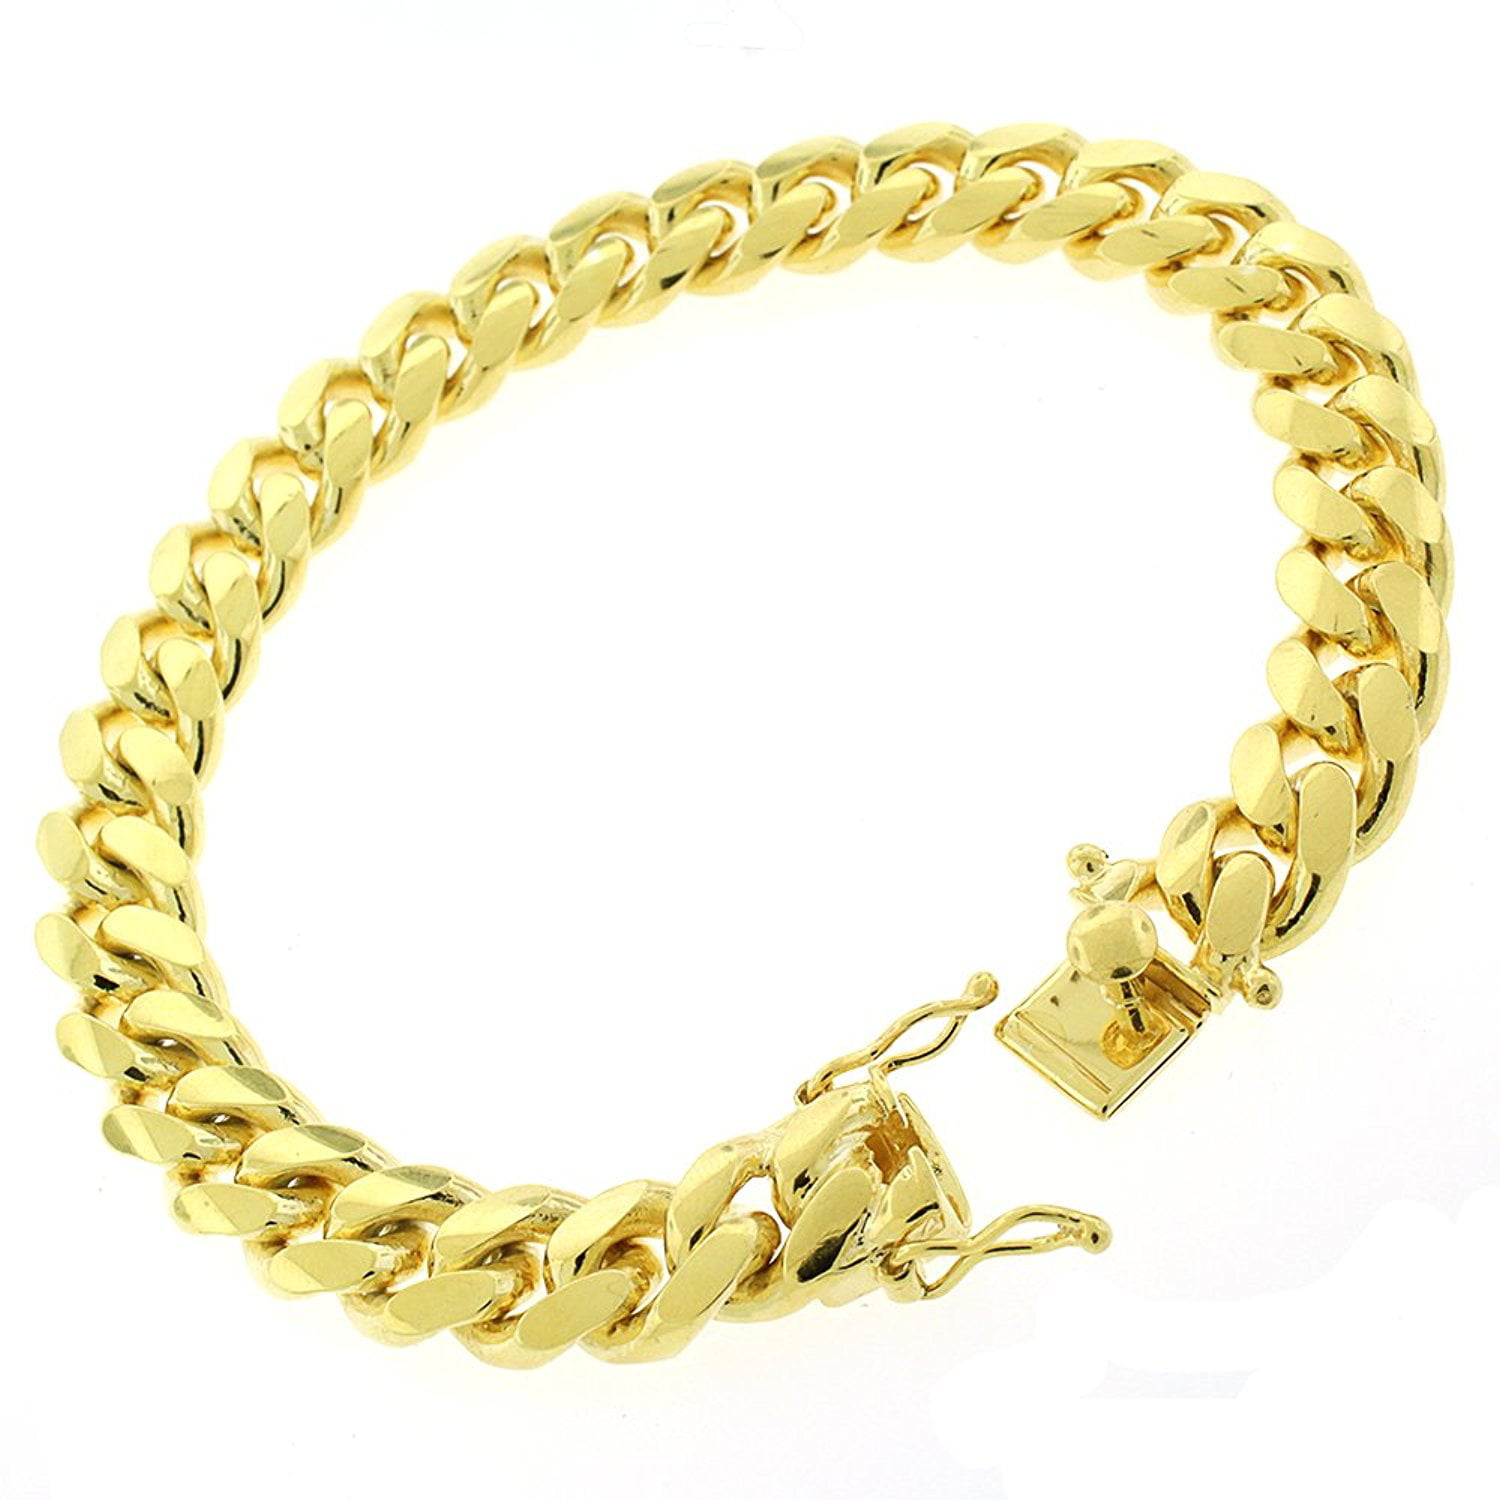 MIAMI CUBAN LINK SOLID STAINLESS STEEL SILVER FINISH THICK 21MM 10inch BRACELET 